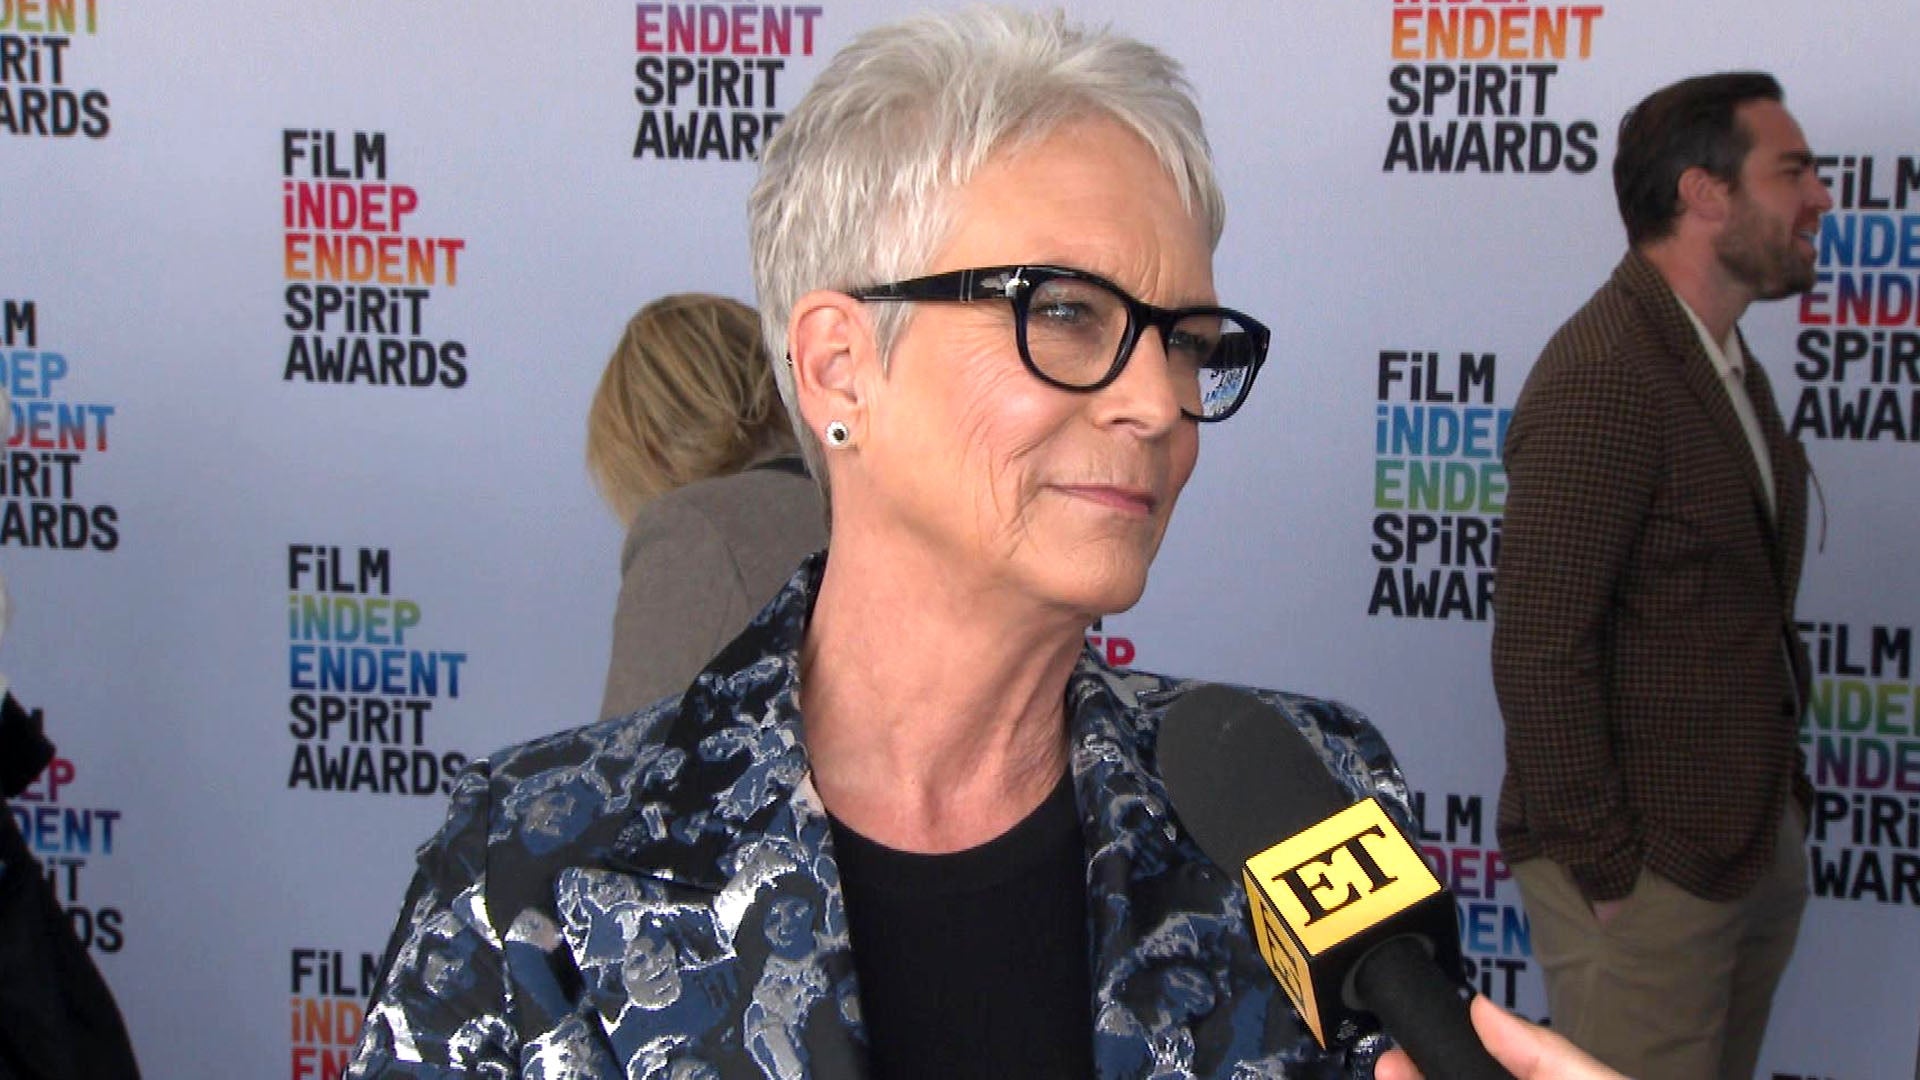 Jamie Lee Curtis Recalls Being in Shock During Viral SAG Awards Kiss Moment With Michelle Yeoh